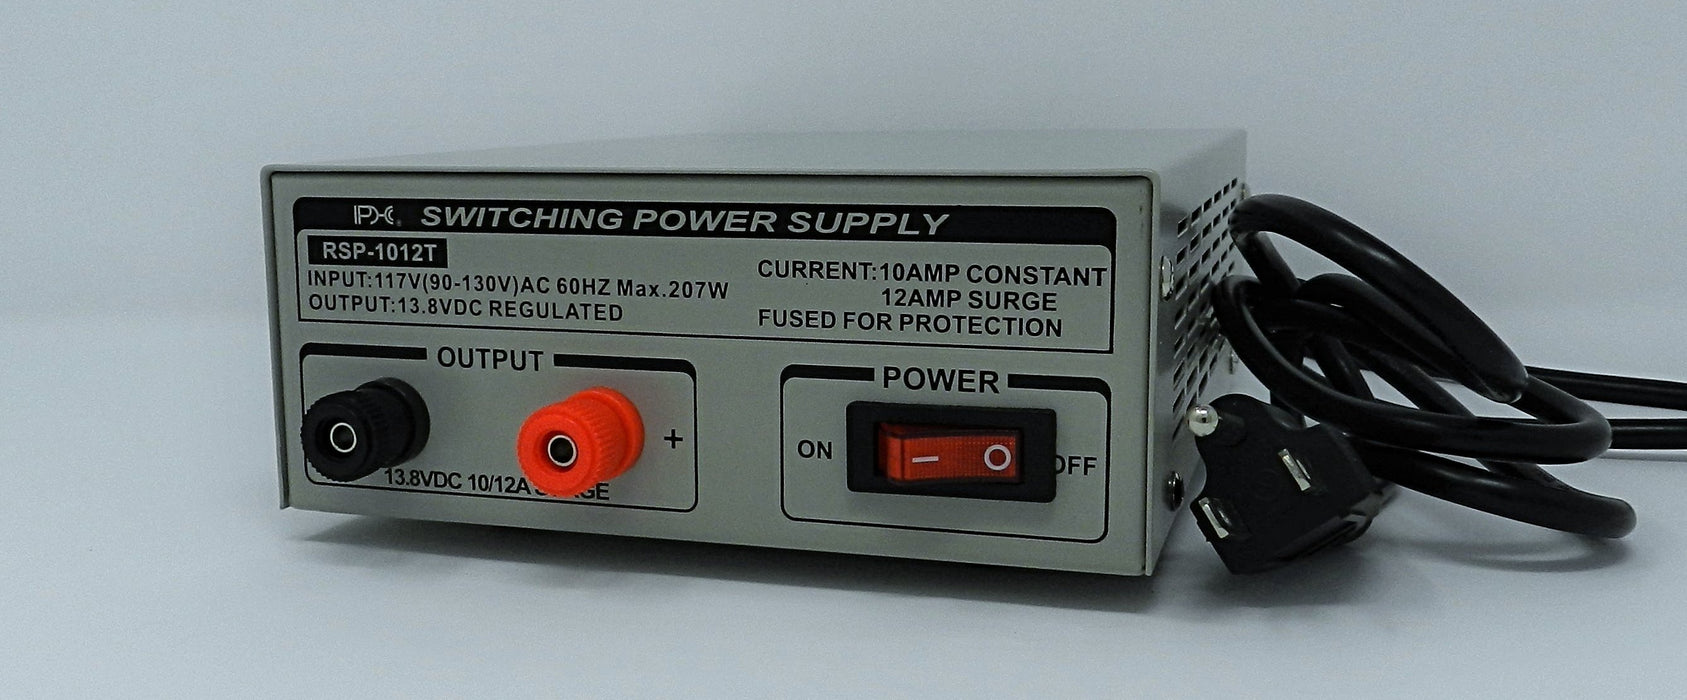 13.8VDC @ 10A DC Regulated Switching Power Supply; Part # RSP-1012T - AC-DC PowerShack